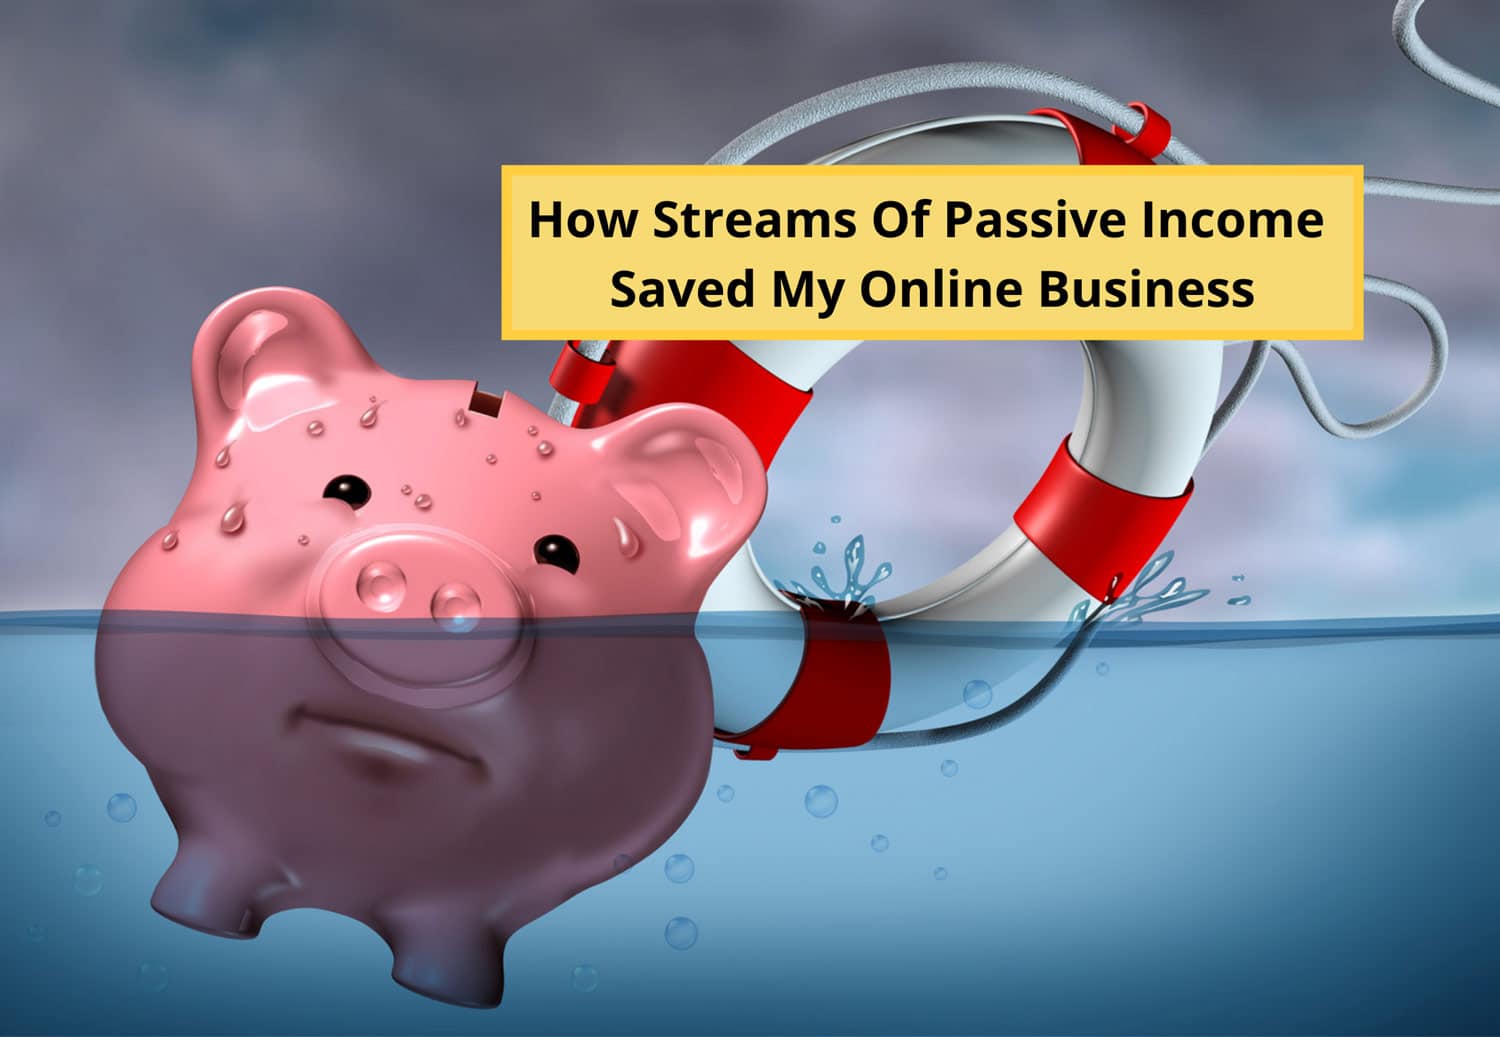 How Streams Of Passive Income Saved My Online Business